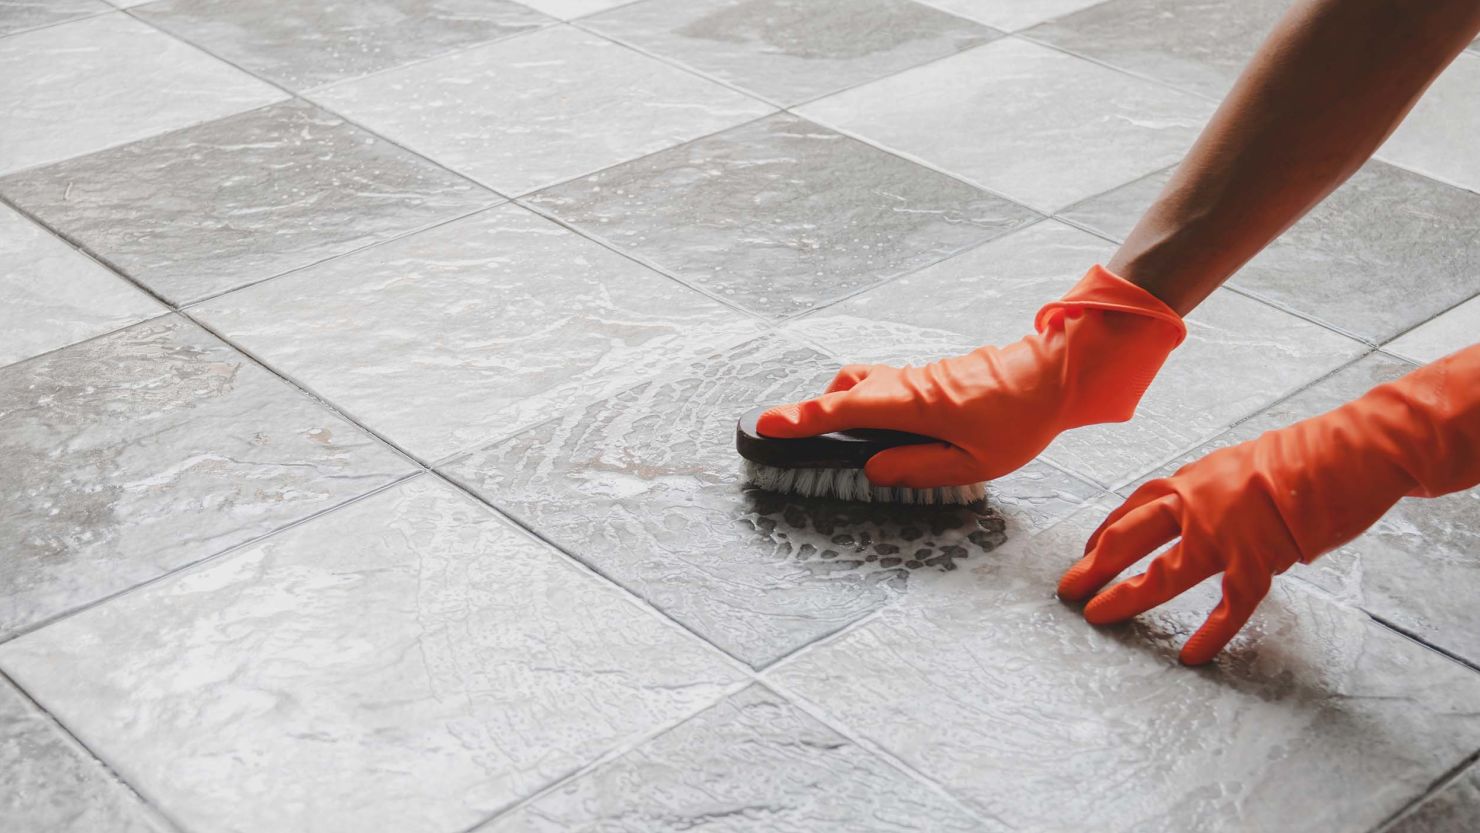 How to Clean Tile Floors - The Home Depot